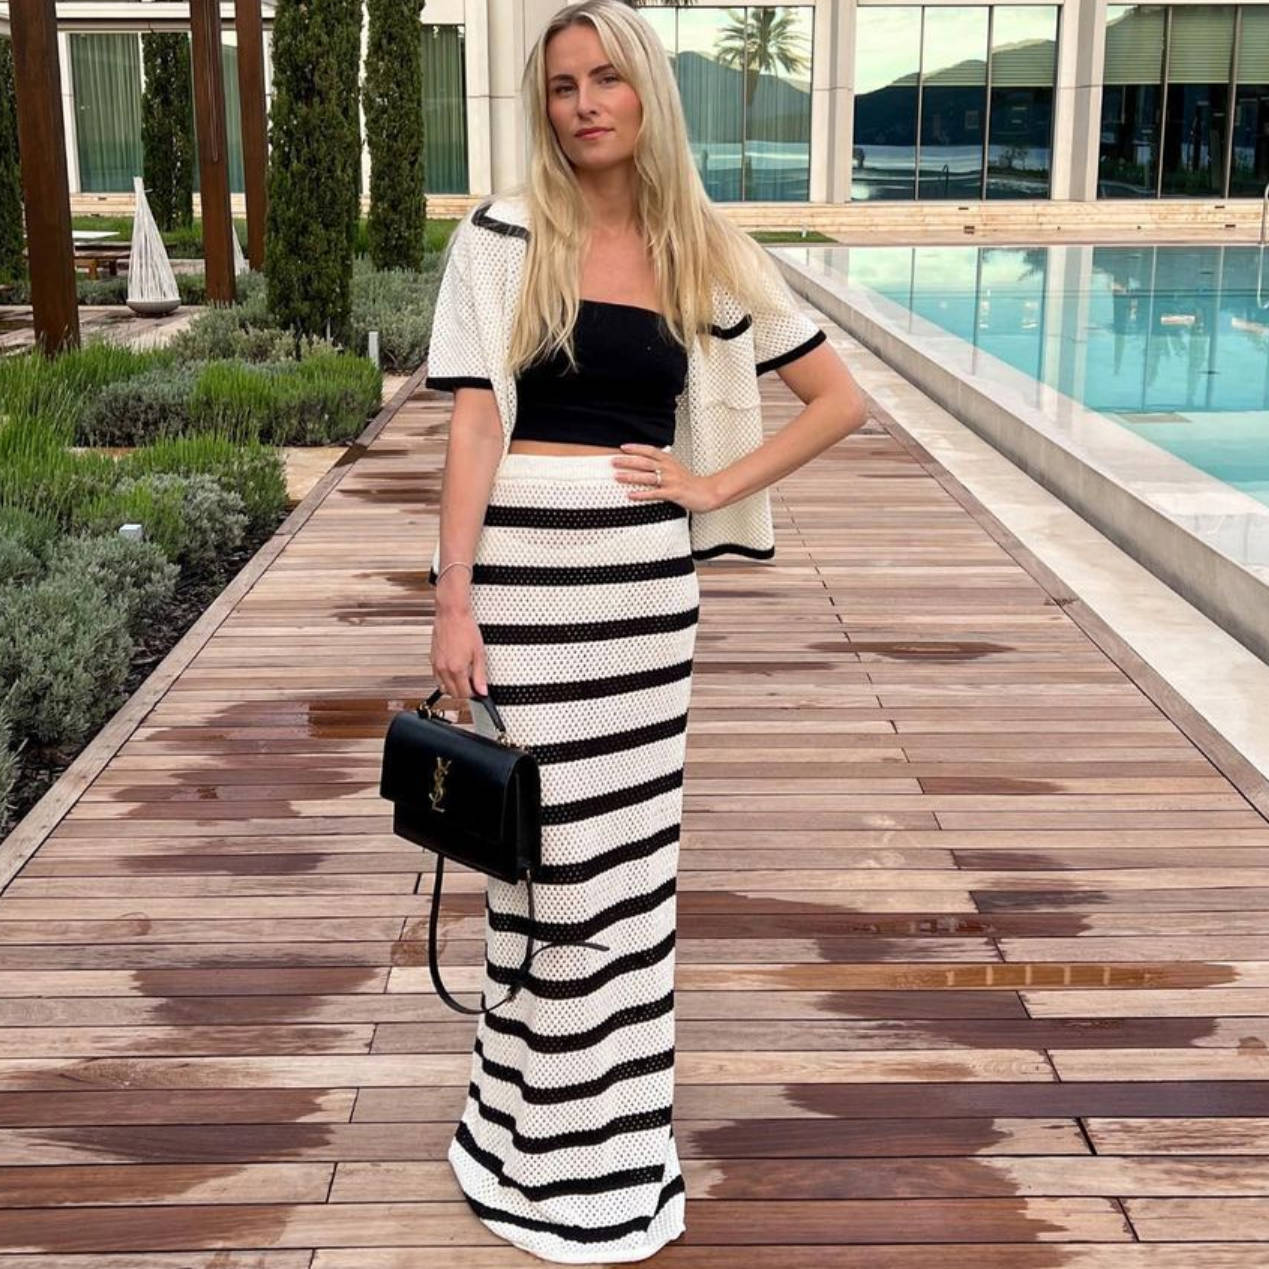 Old Money Aesthetic Outfits | Striped Knitted Cardigan Maxi Skirt